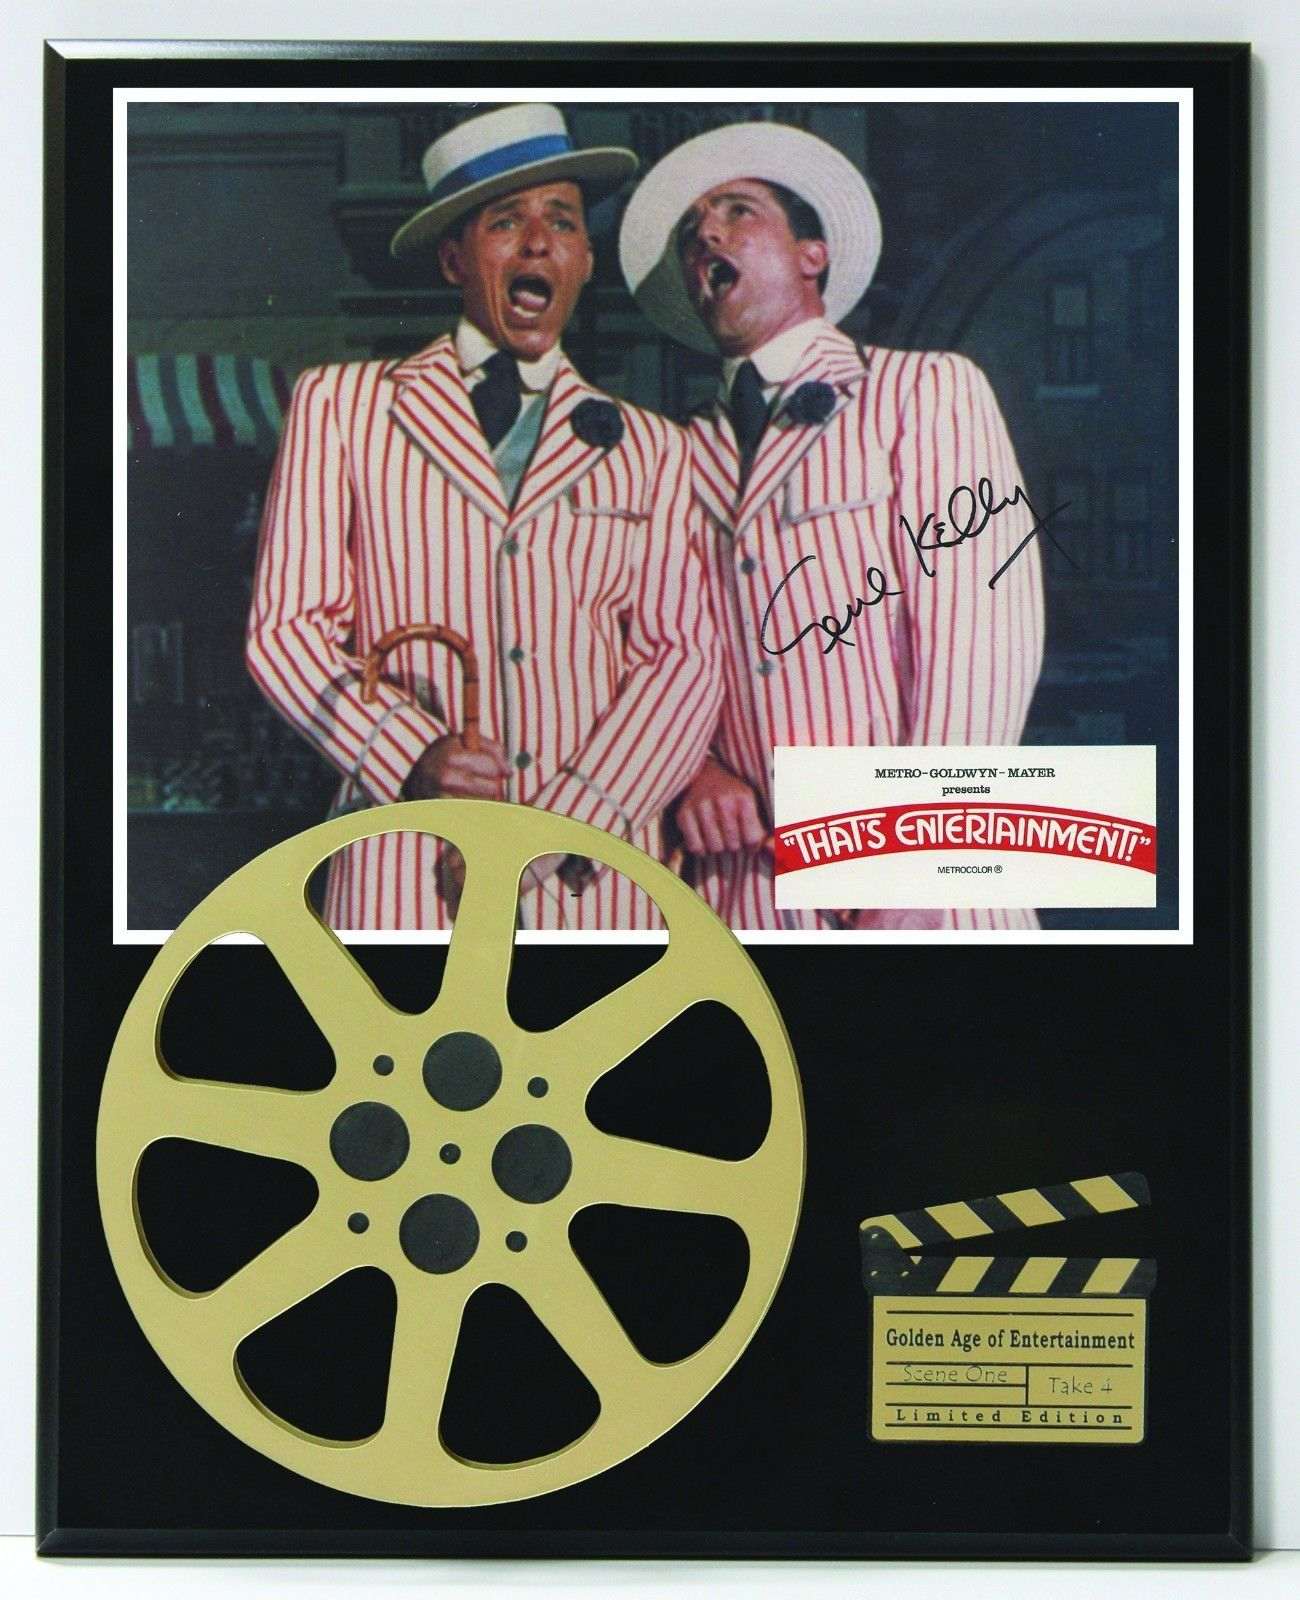 Gene Kelly Limited Edition Reproduction Signature And Film Reel Display -  Gold Record Outlet Album and Disc Collectible Memorabilia